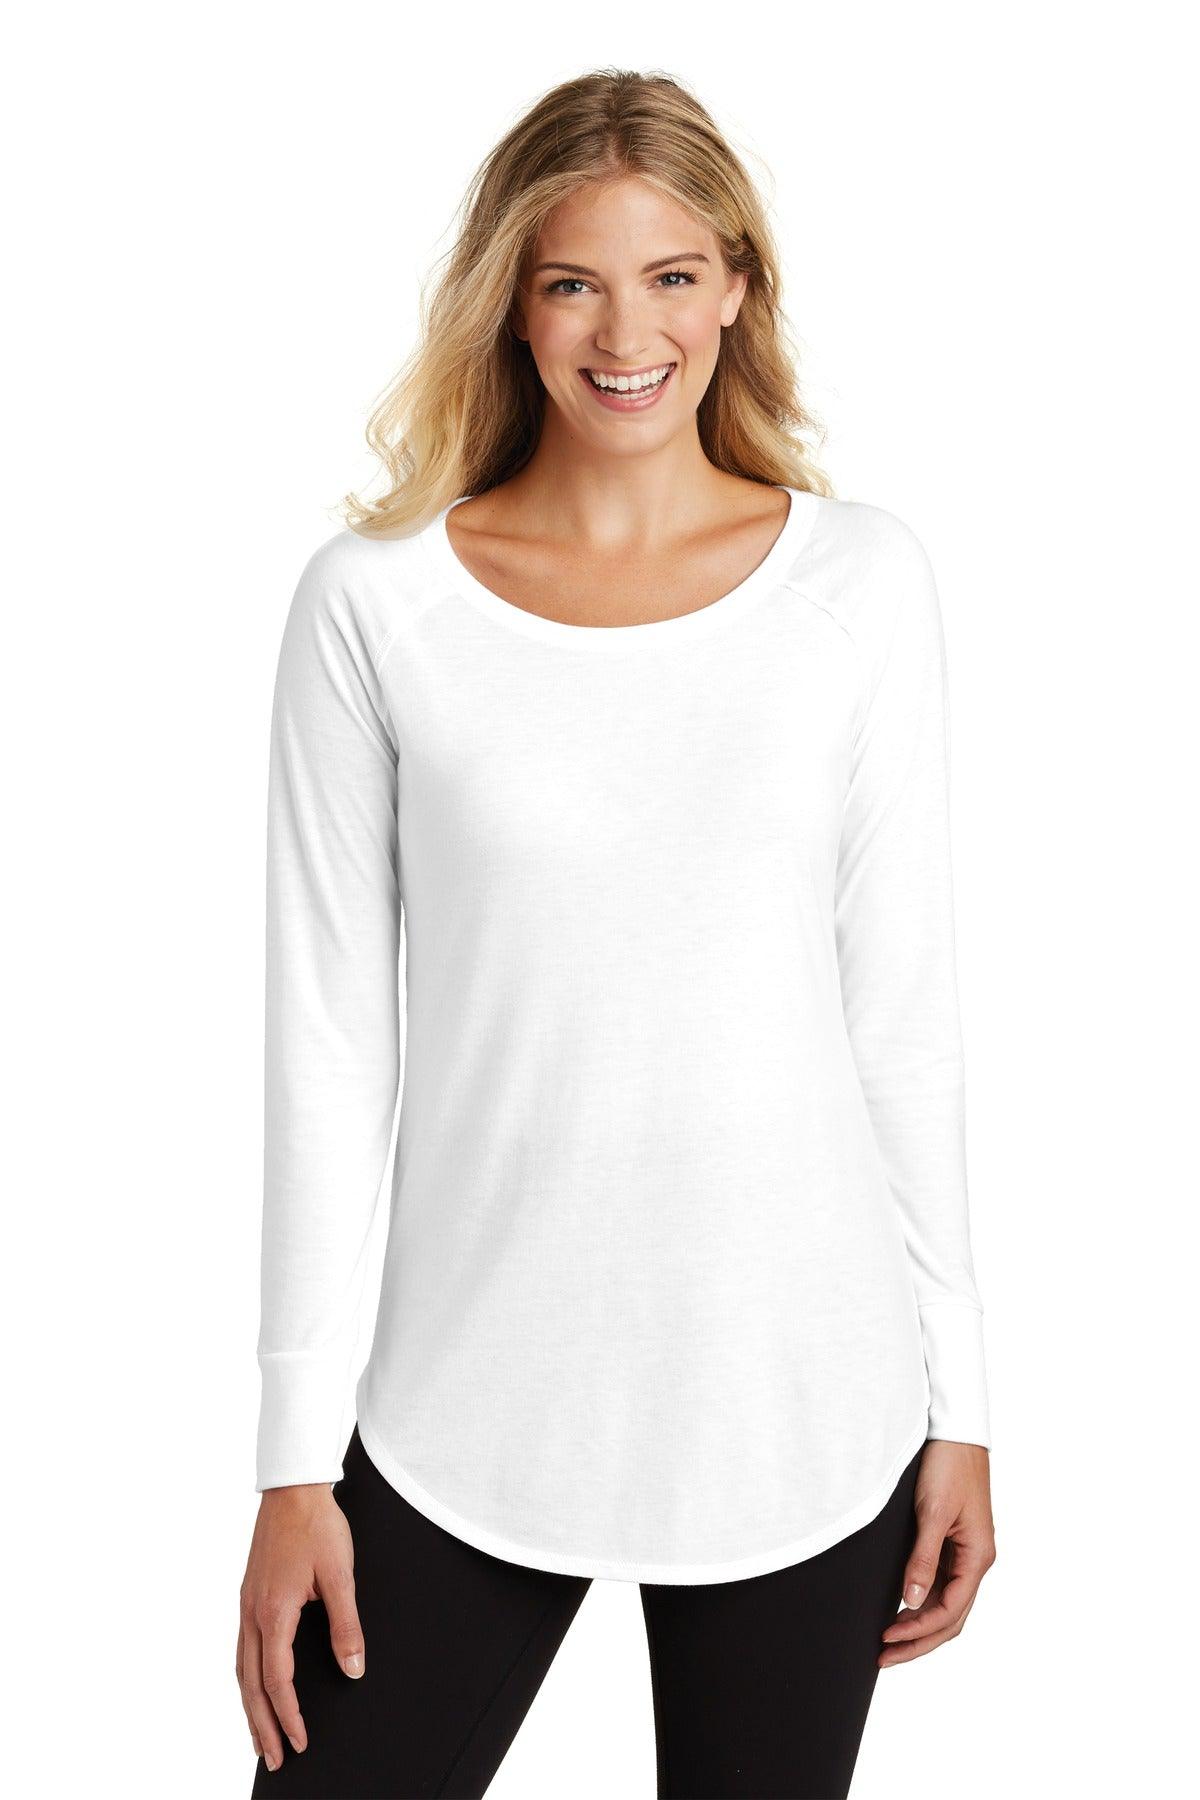 District Women's Perfect Tri Long Sleeve Tunic Tee. DT132L - Dresses Max